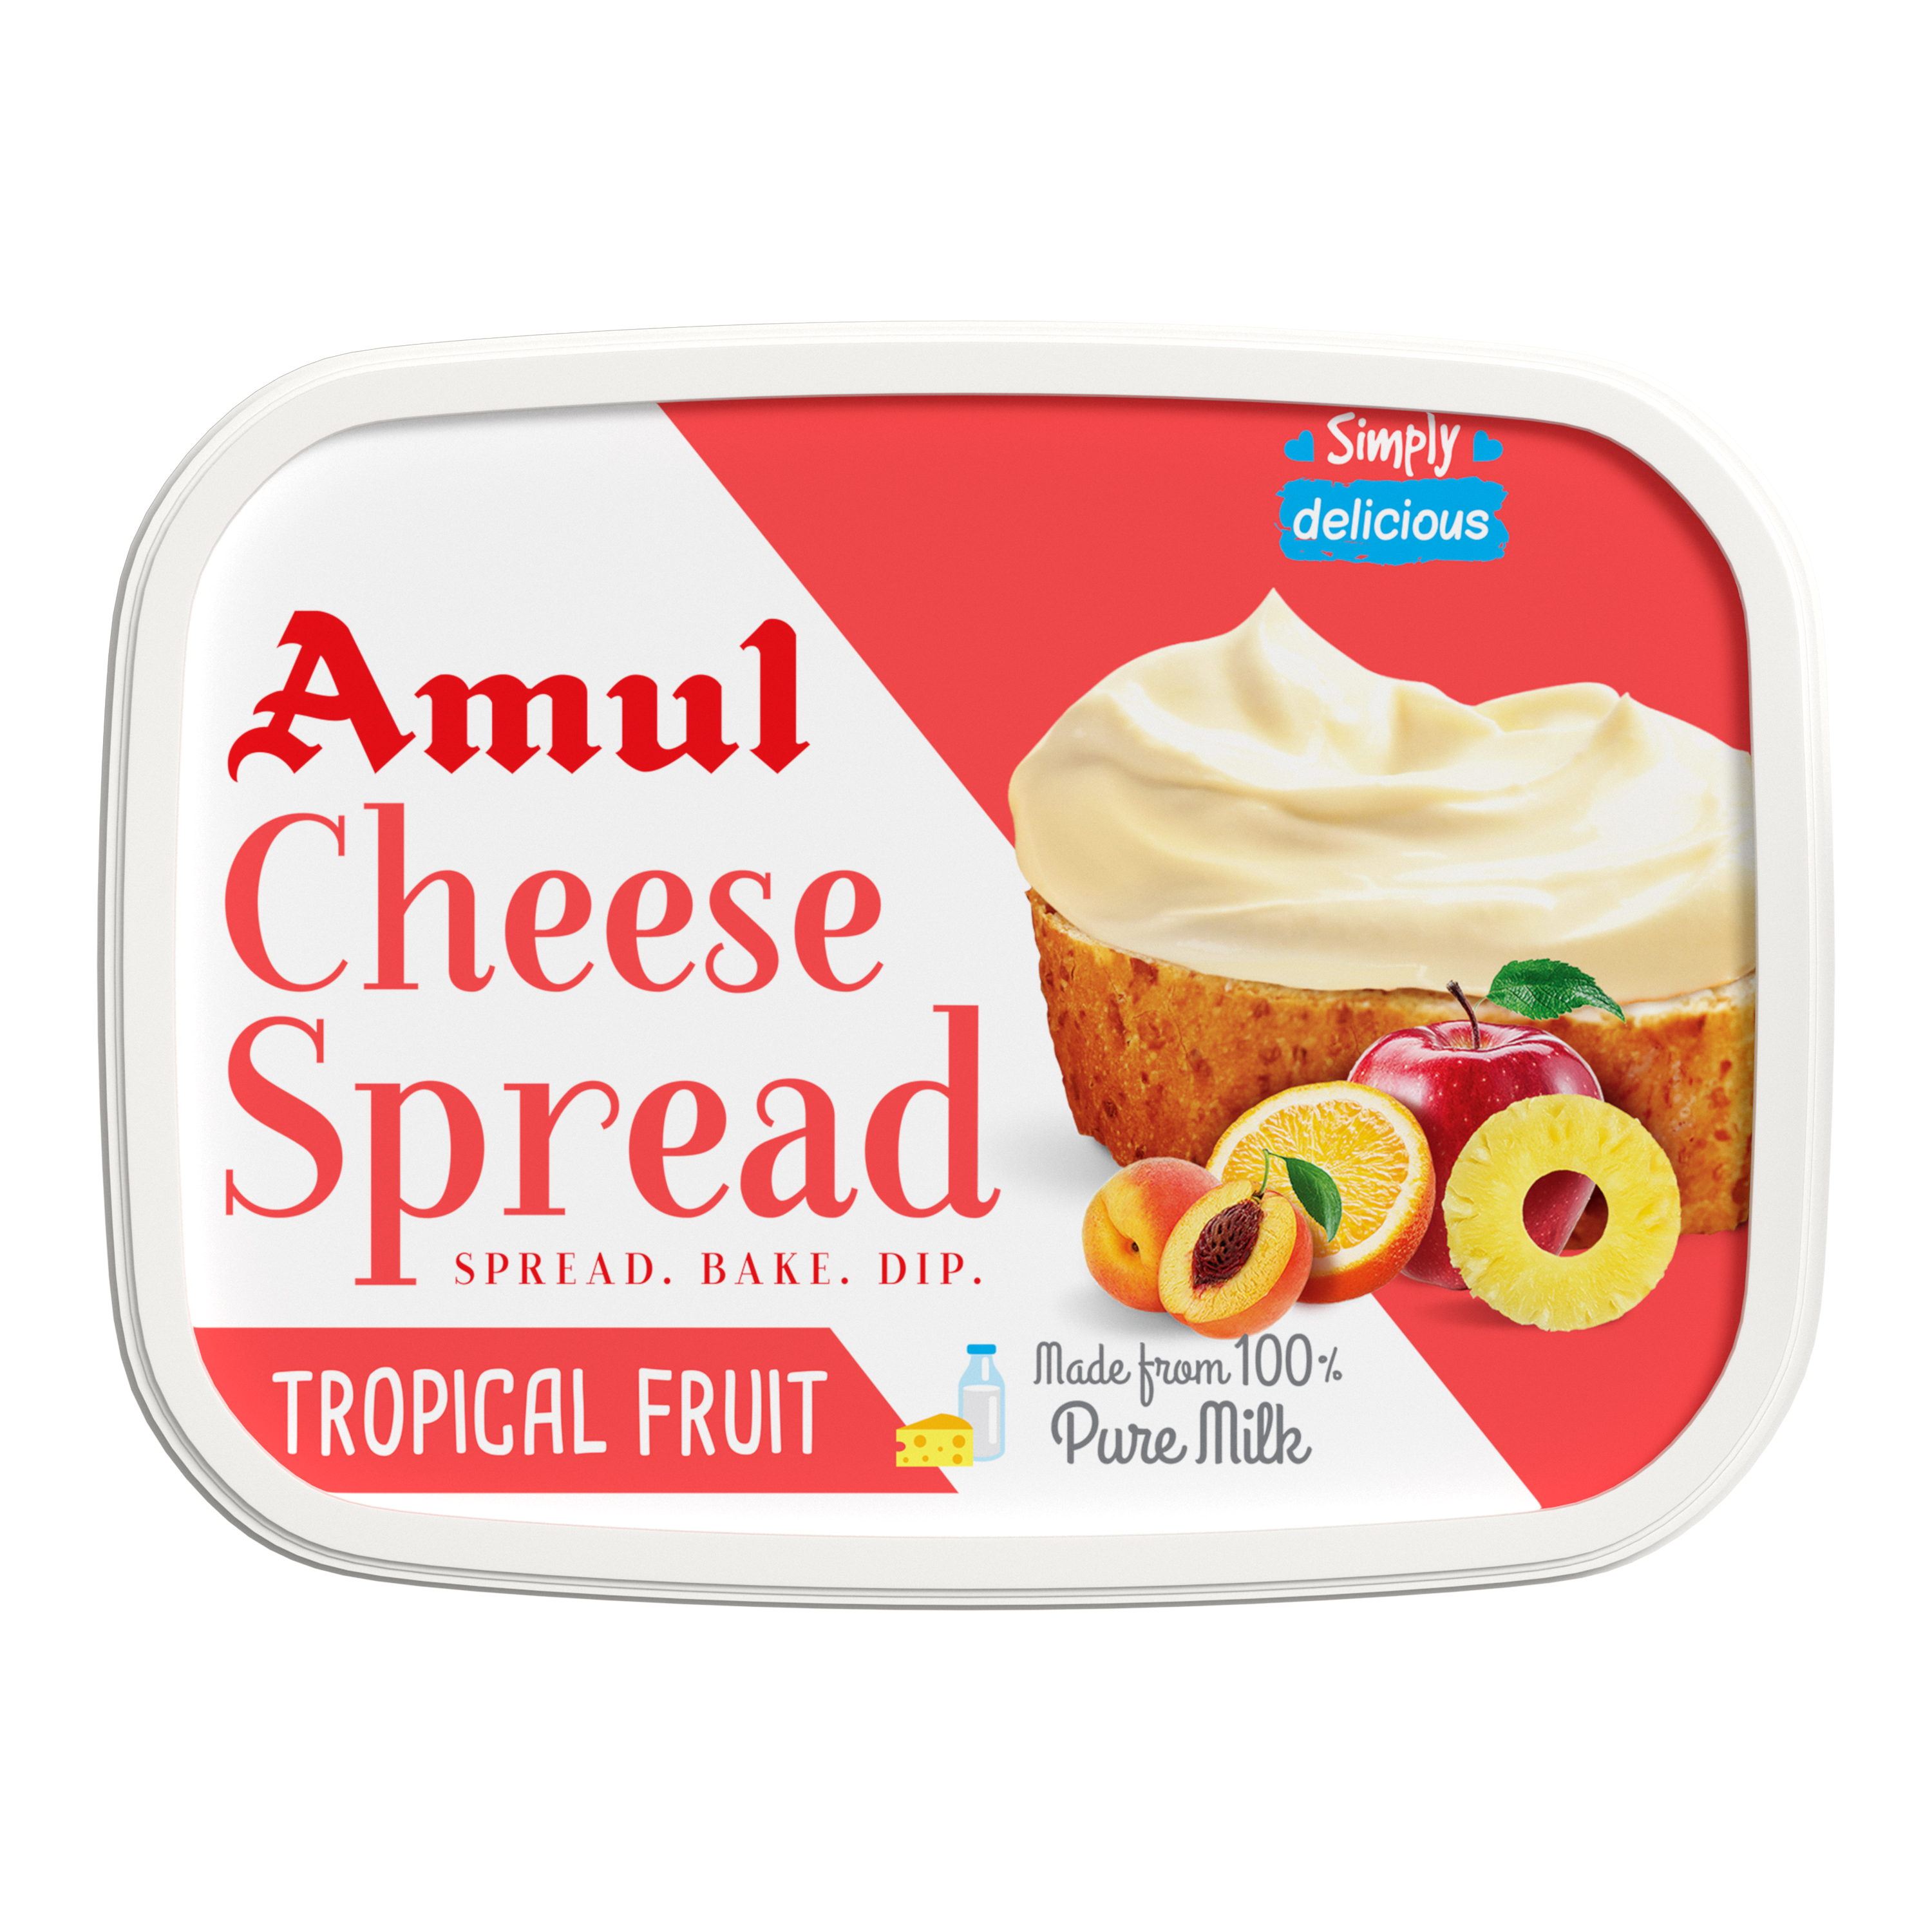 Amul Cheese Spread Tropical Fruit